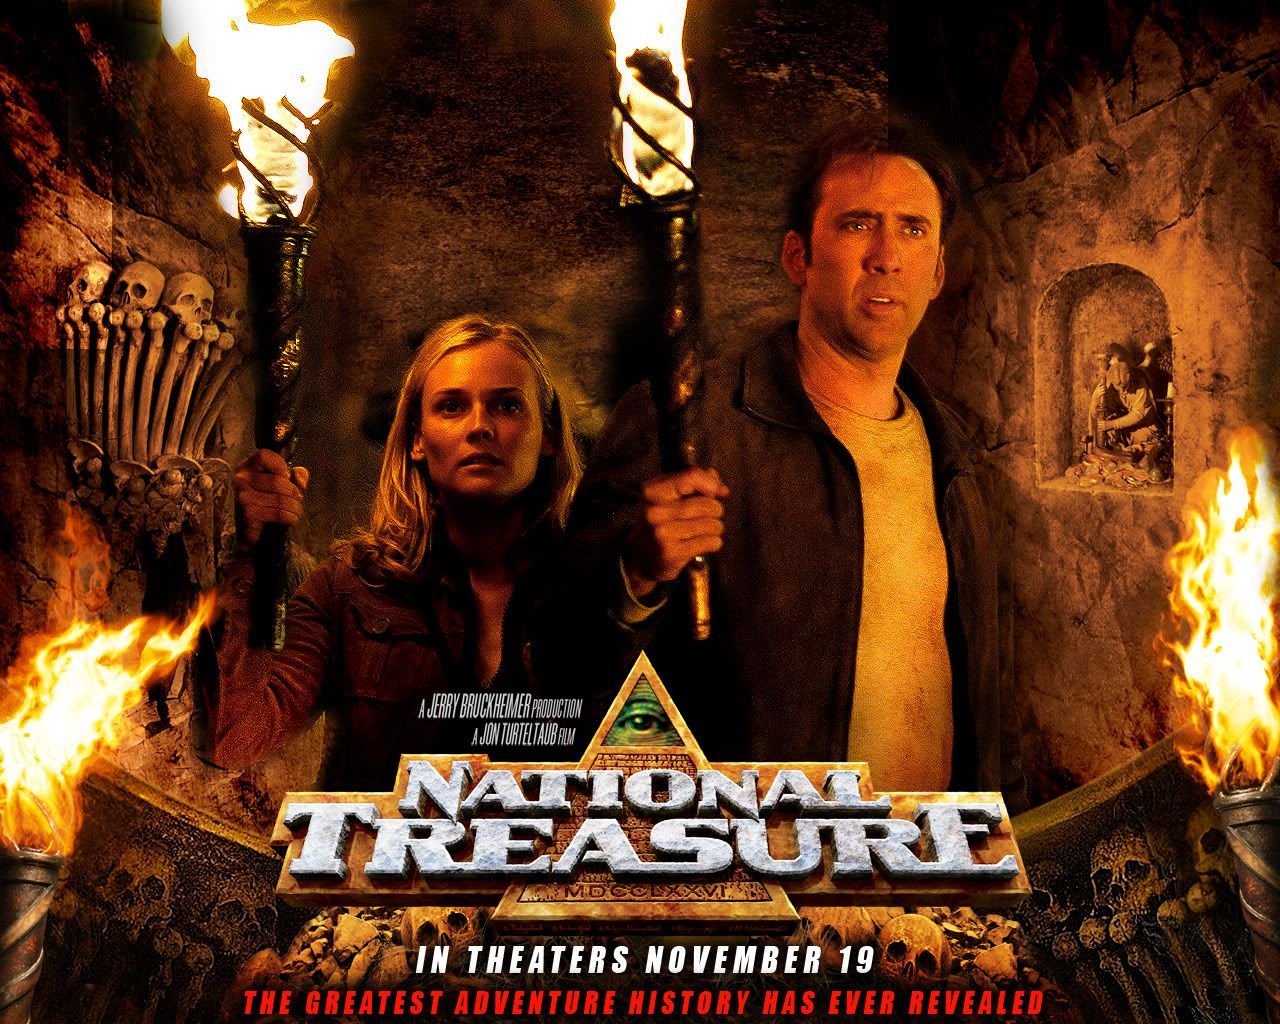 Some NATIONAL TREASURE wallpaper i have not seen before! CAGE FORUM